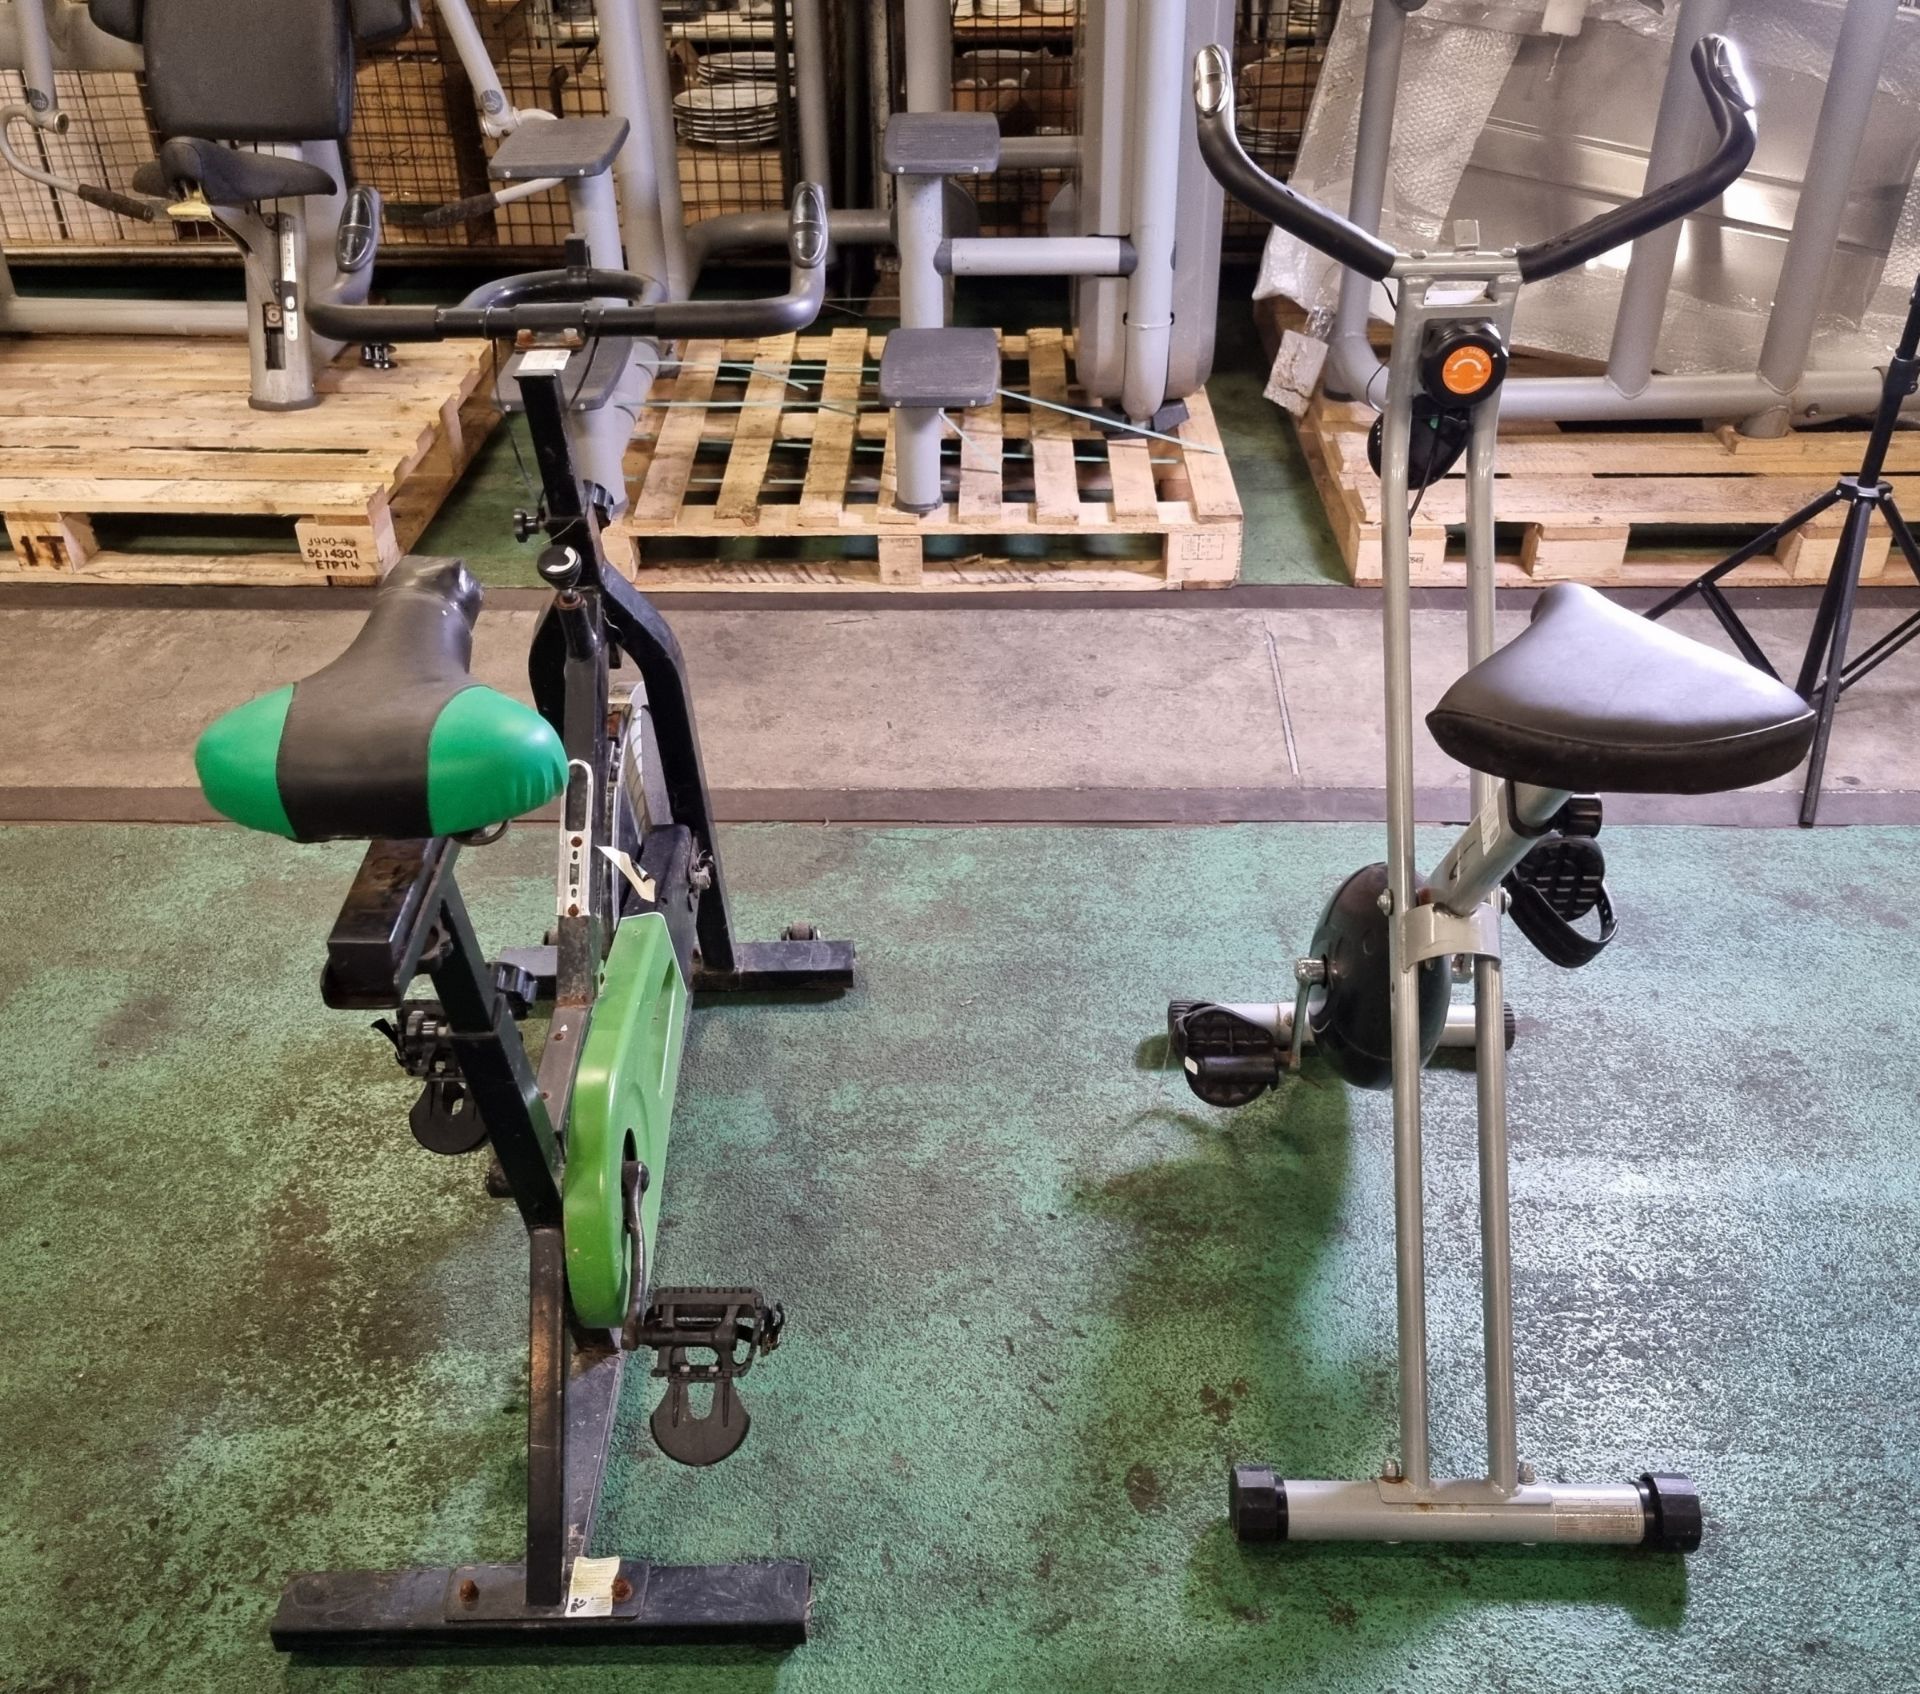 2x static exercise bikes - AS SPARES OR REPAIRS - Full details in the description - Image 3 of 9